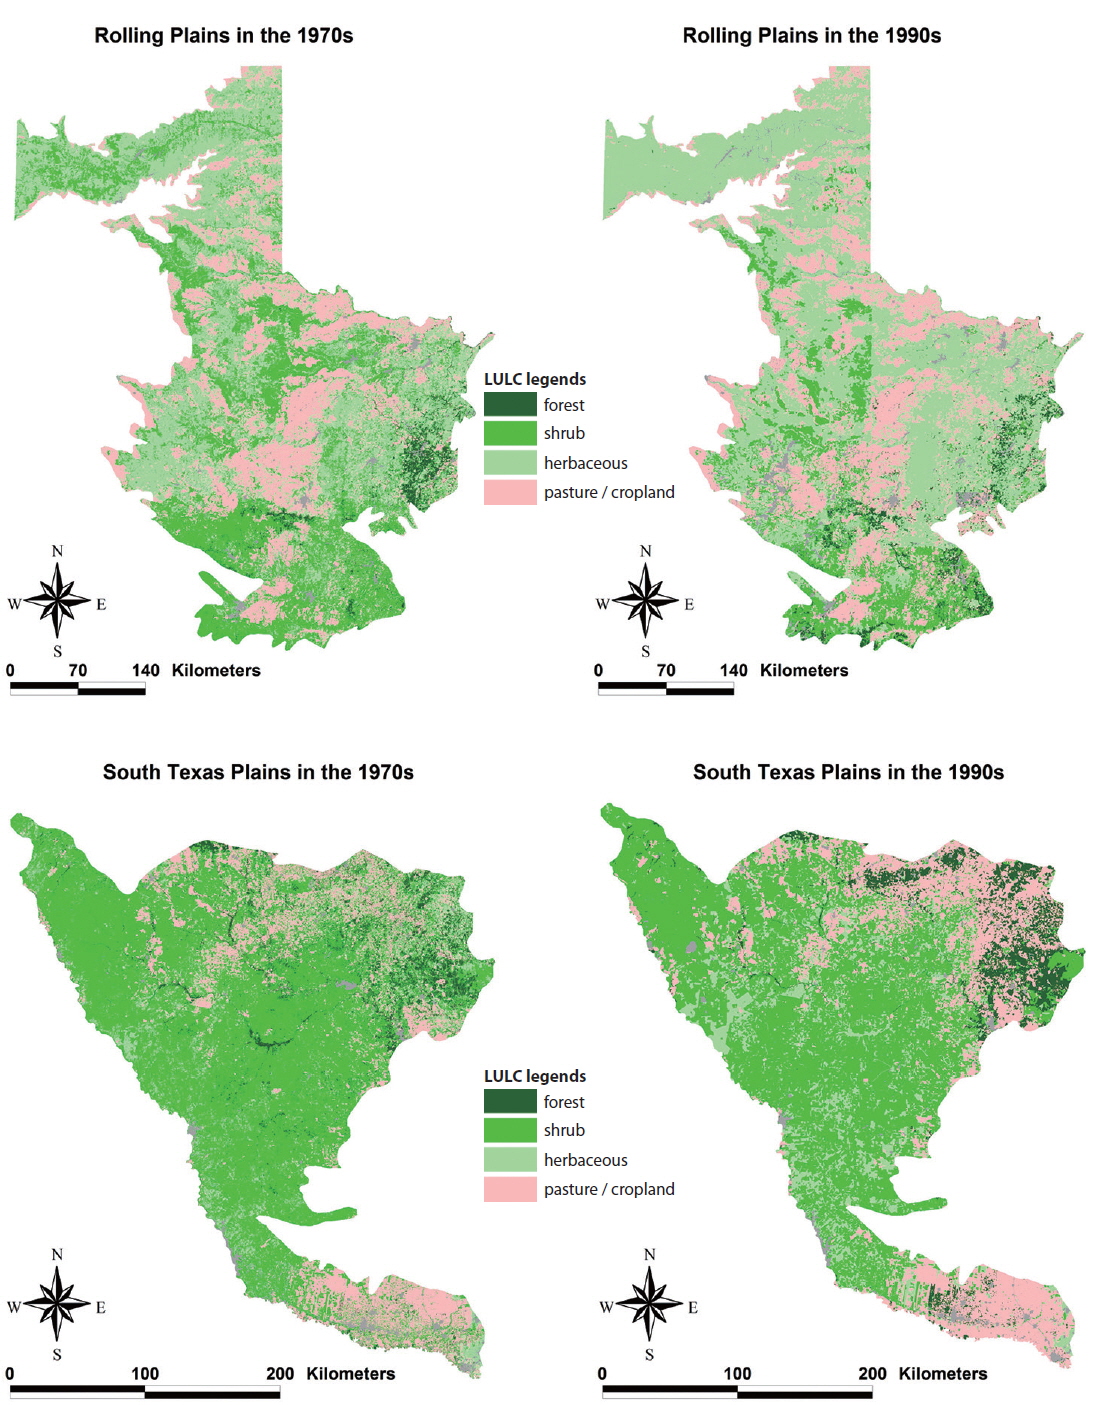 Land cover classified into forest, shrub, herbaceous, and pasture-cropland types from 1970s to 1990s of the Rolling Plains and South Texas Plains.